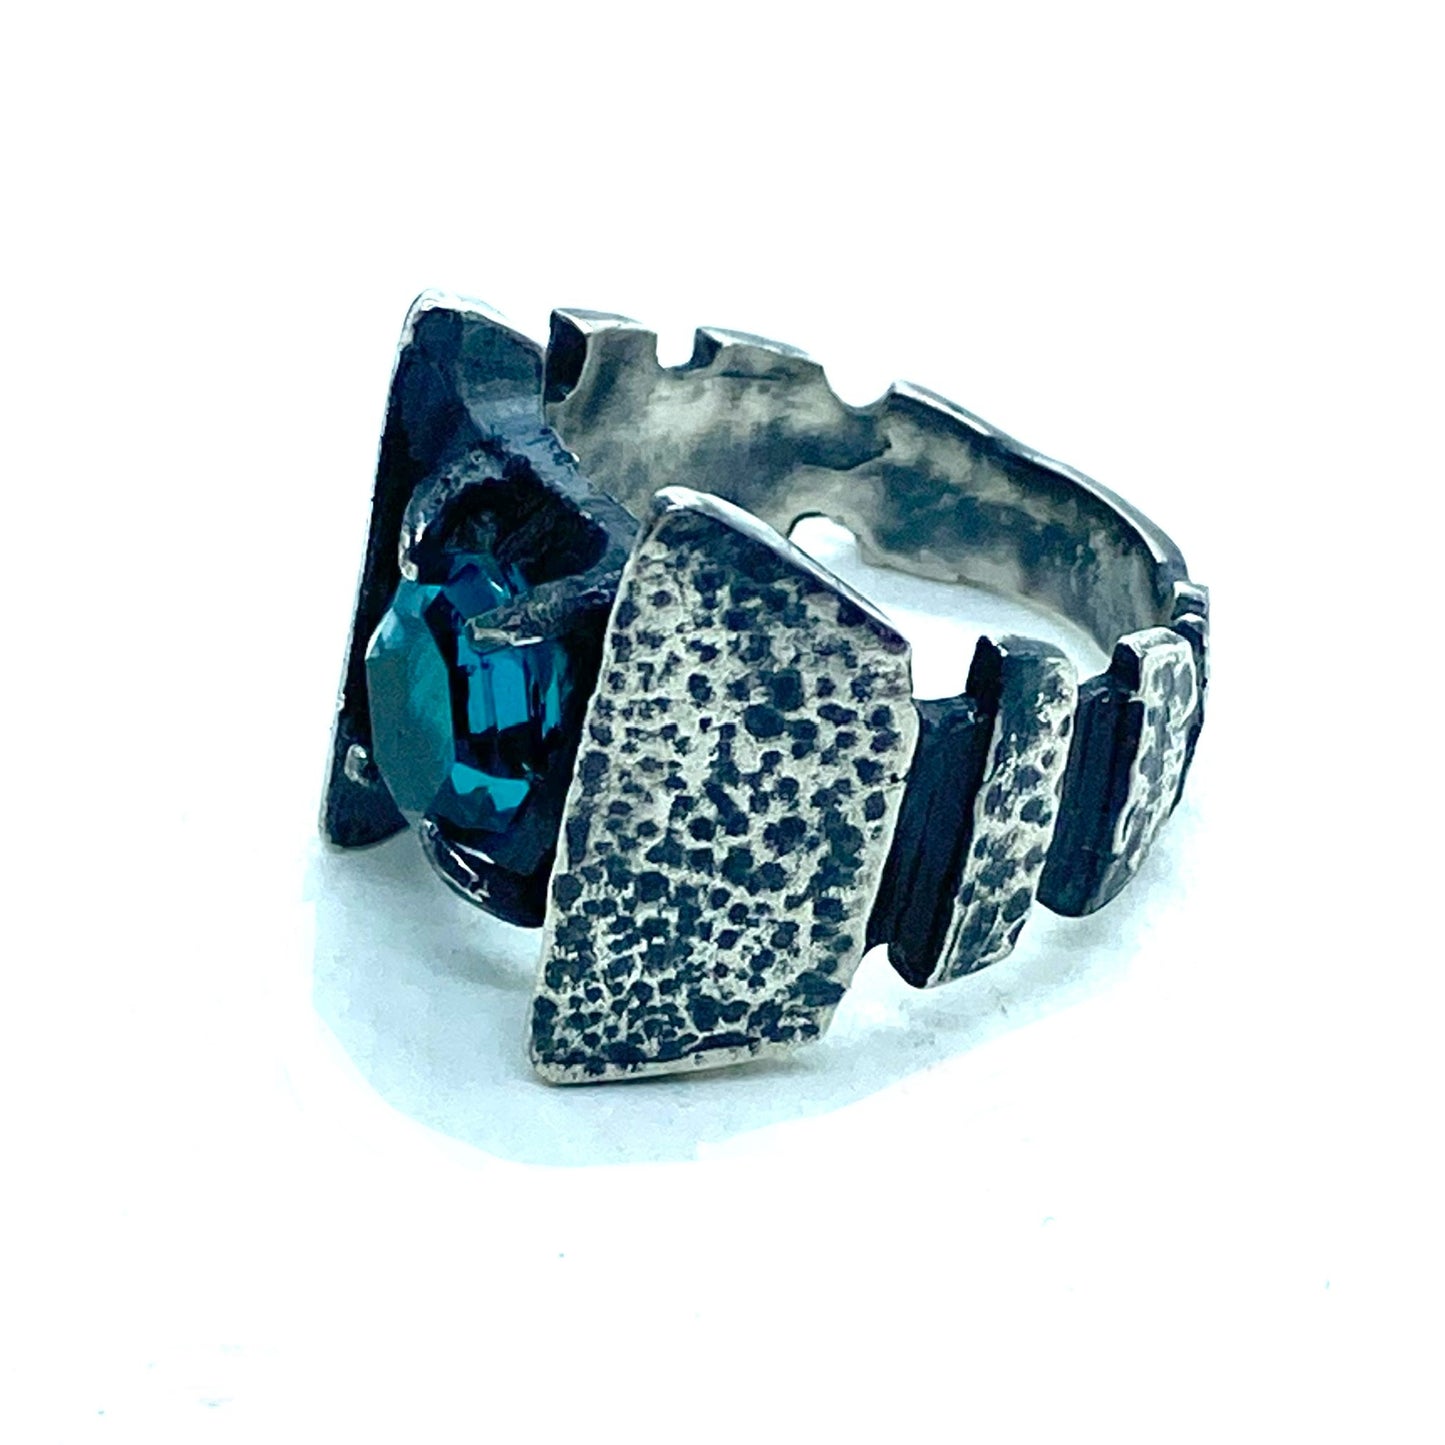 Blackgaurd’s Brutalist Ring with bridewell in Sterling Silver